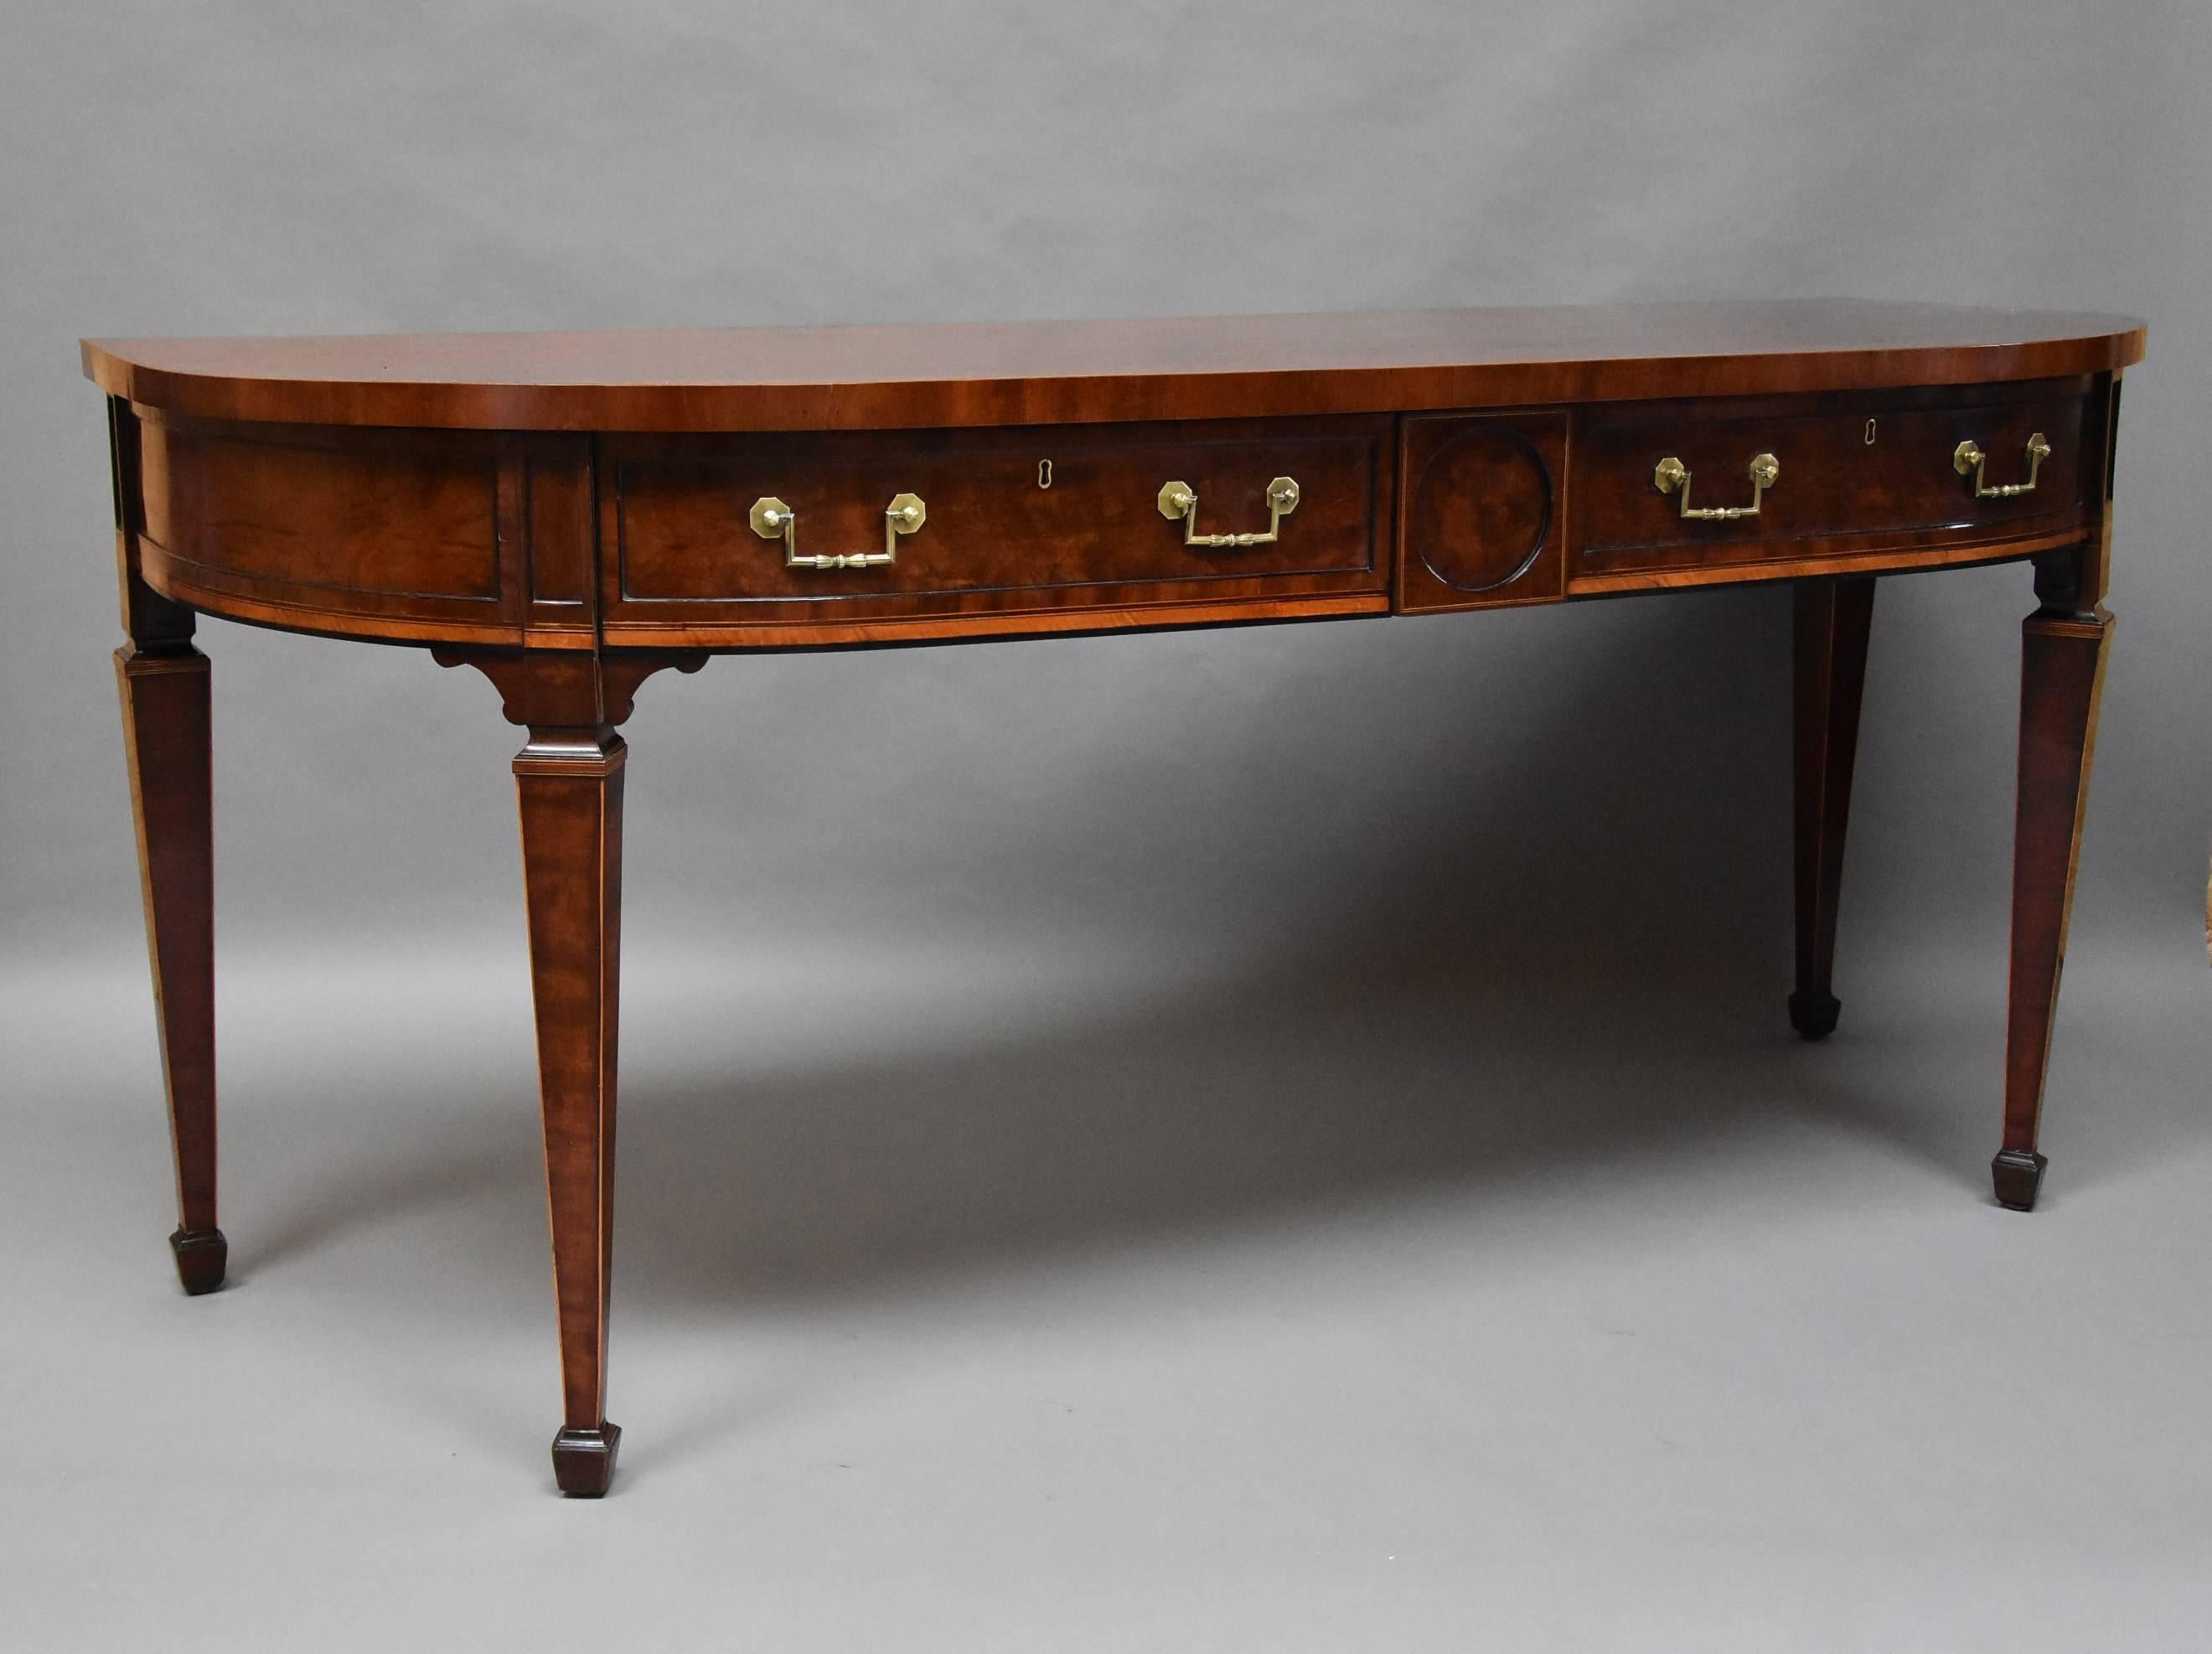 An extremely rare and fine quality late 18th century Sheraton period mahogany side server or side table of bow form and of superb patina (color).

This superb side server consists of a superbly figured mahogany veneered top with mahogany